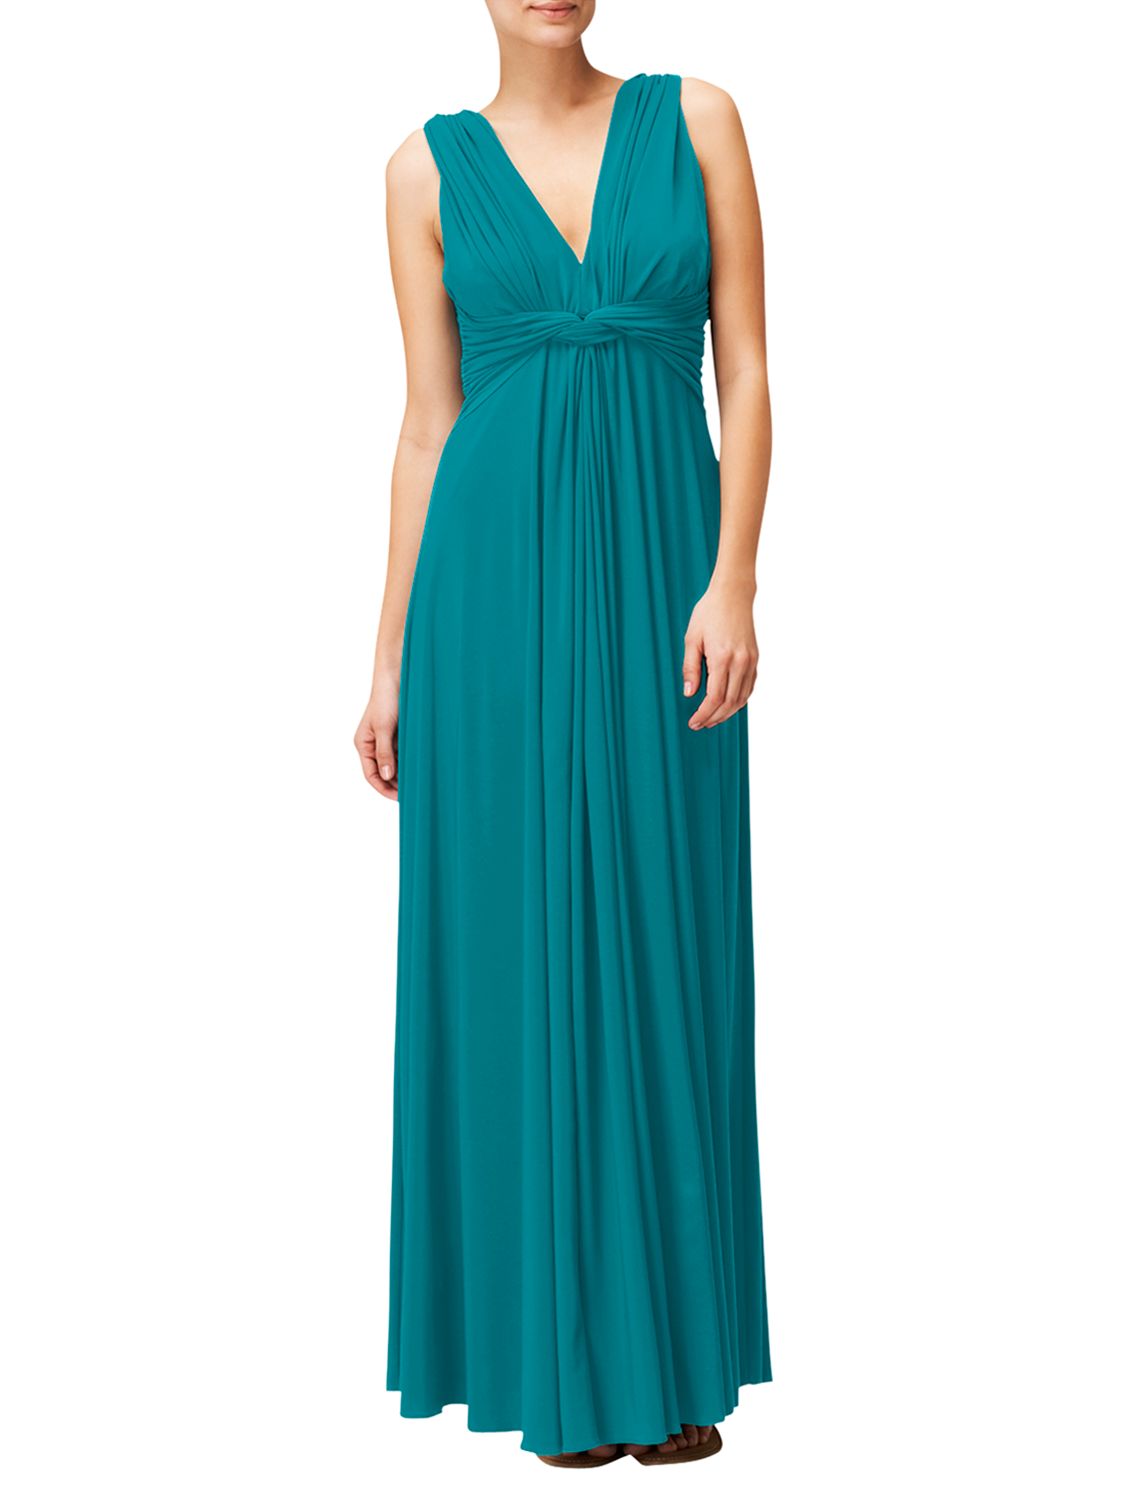 Kate looks so beautiful in teal Jenny Packham | fashionmommy's Blog